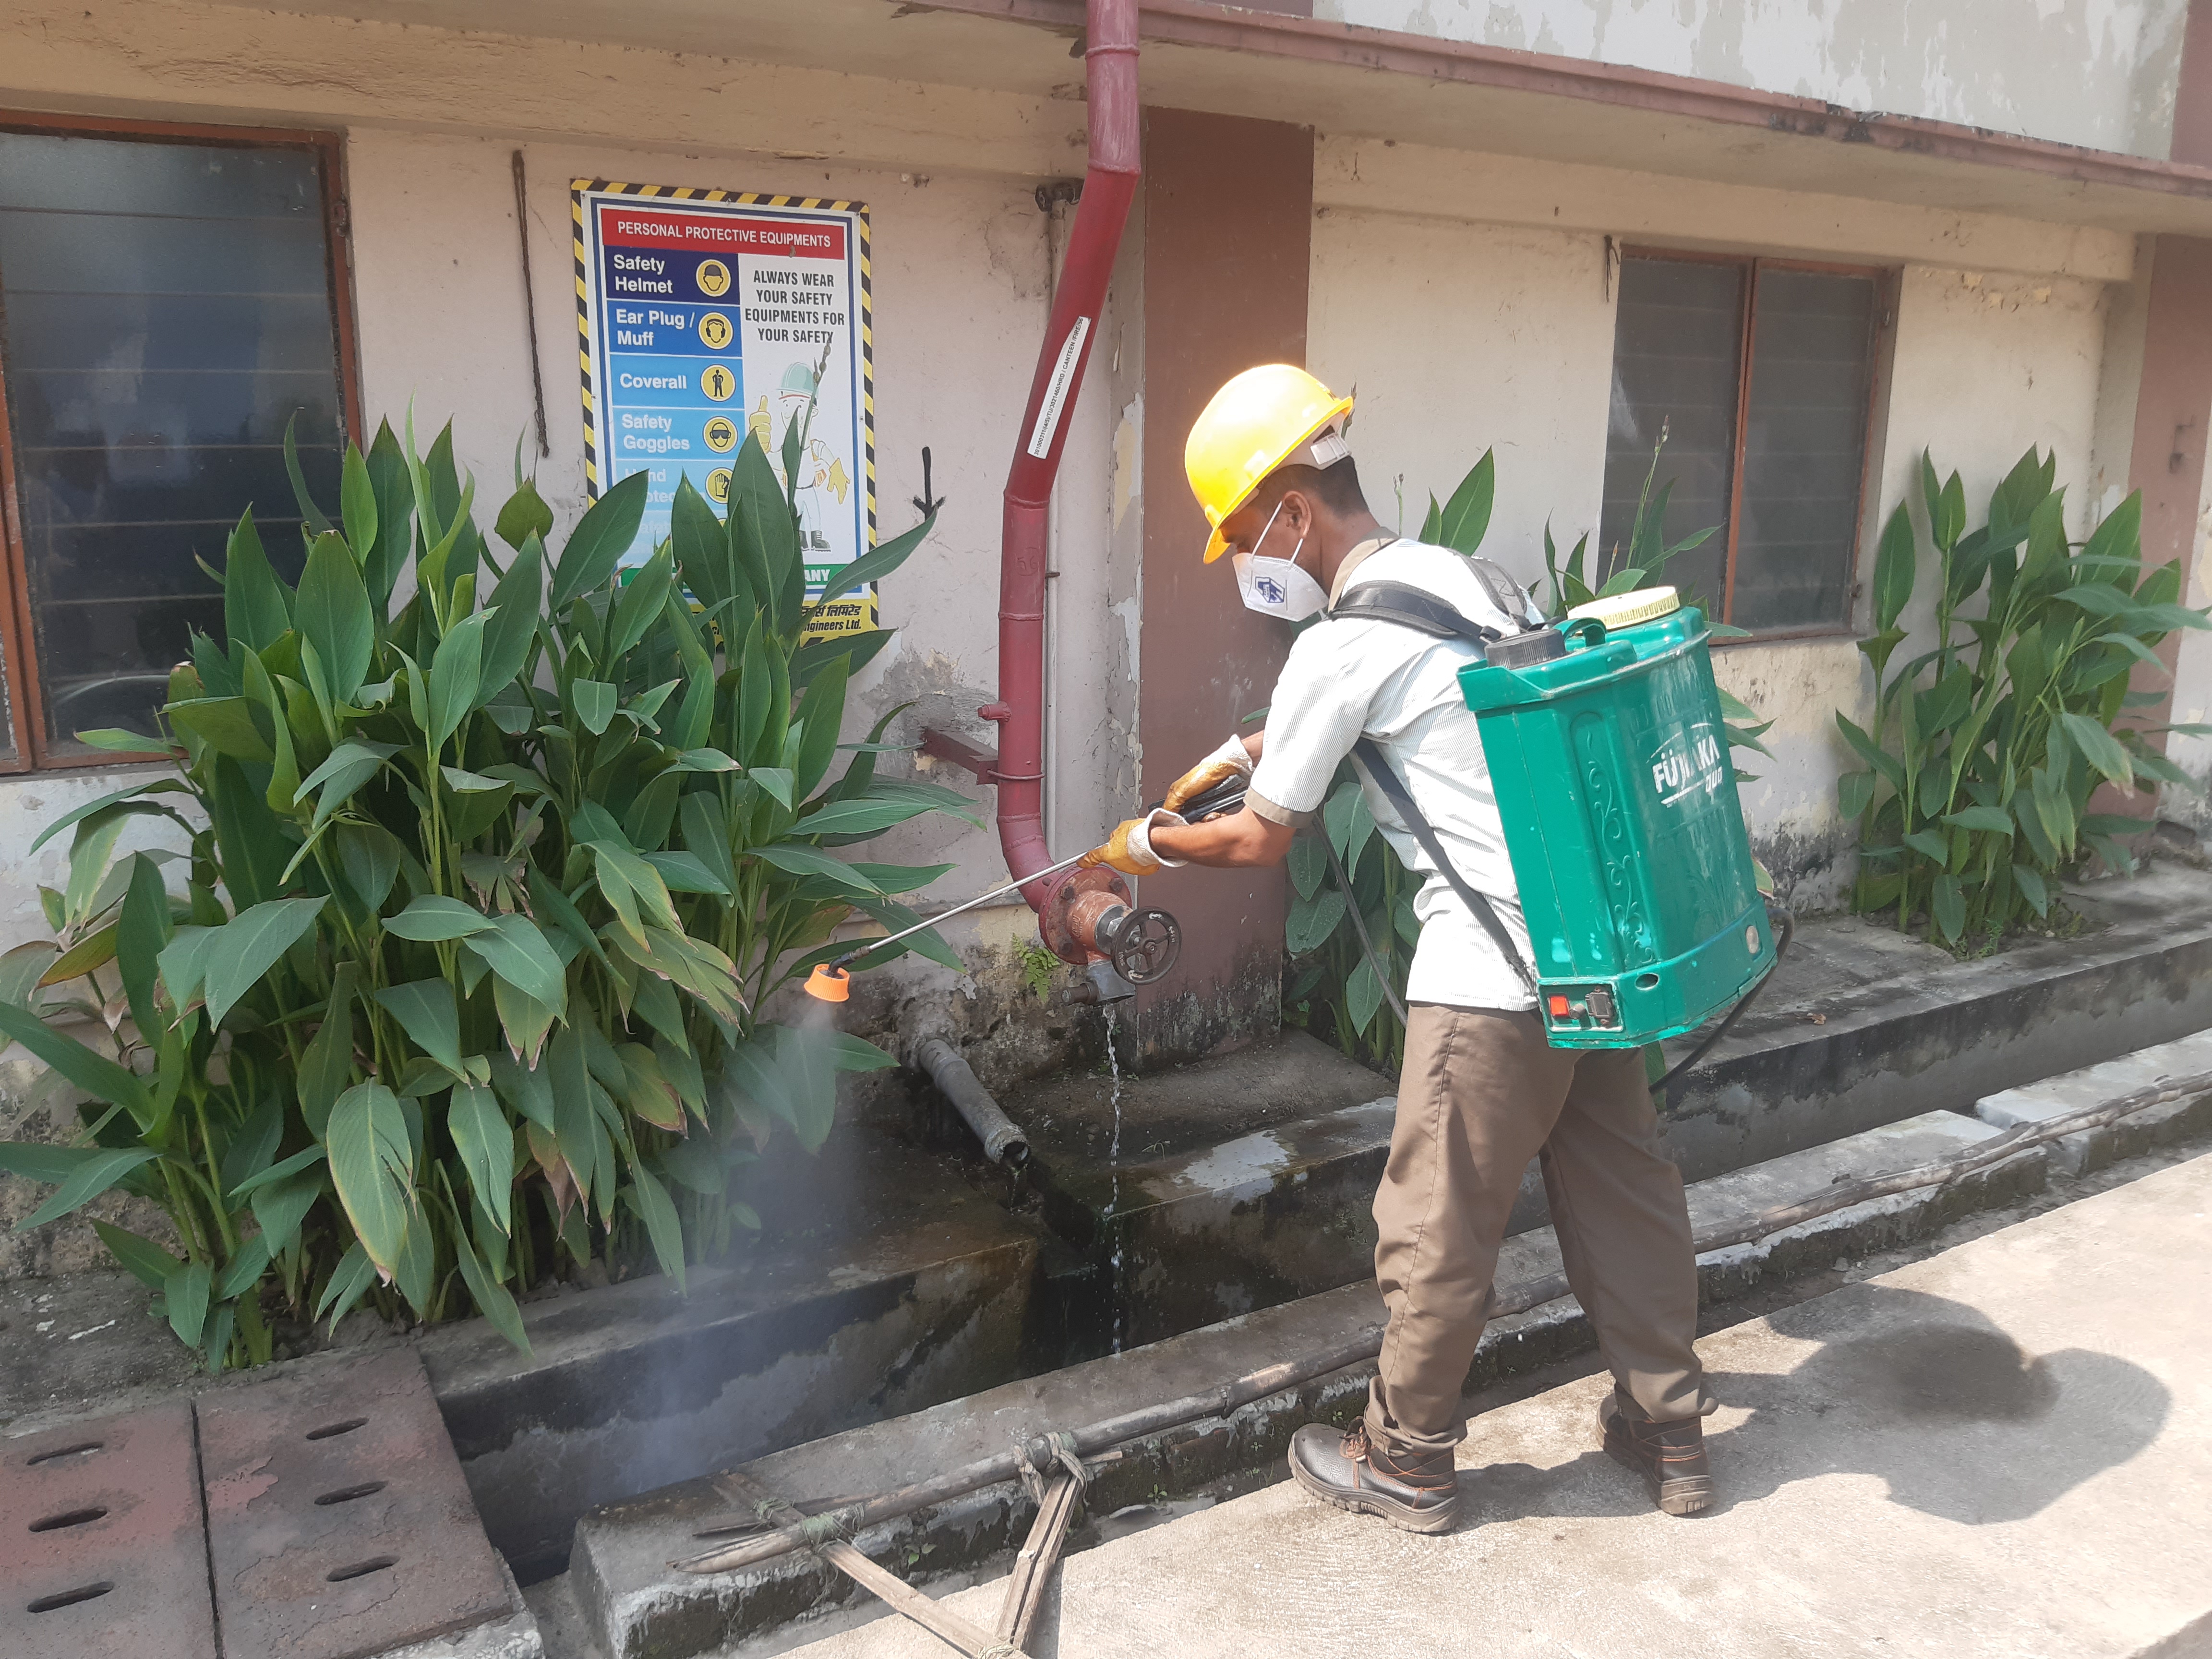 Insecticidal Fumigation Drive to tackle Mosquito Breeding & Pest Control at work place